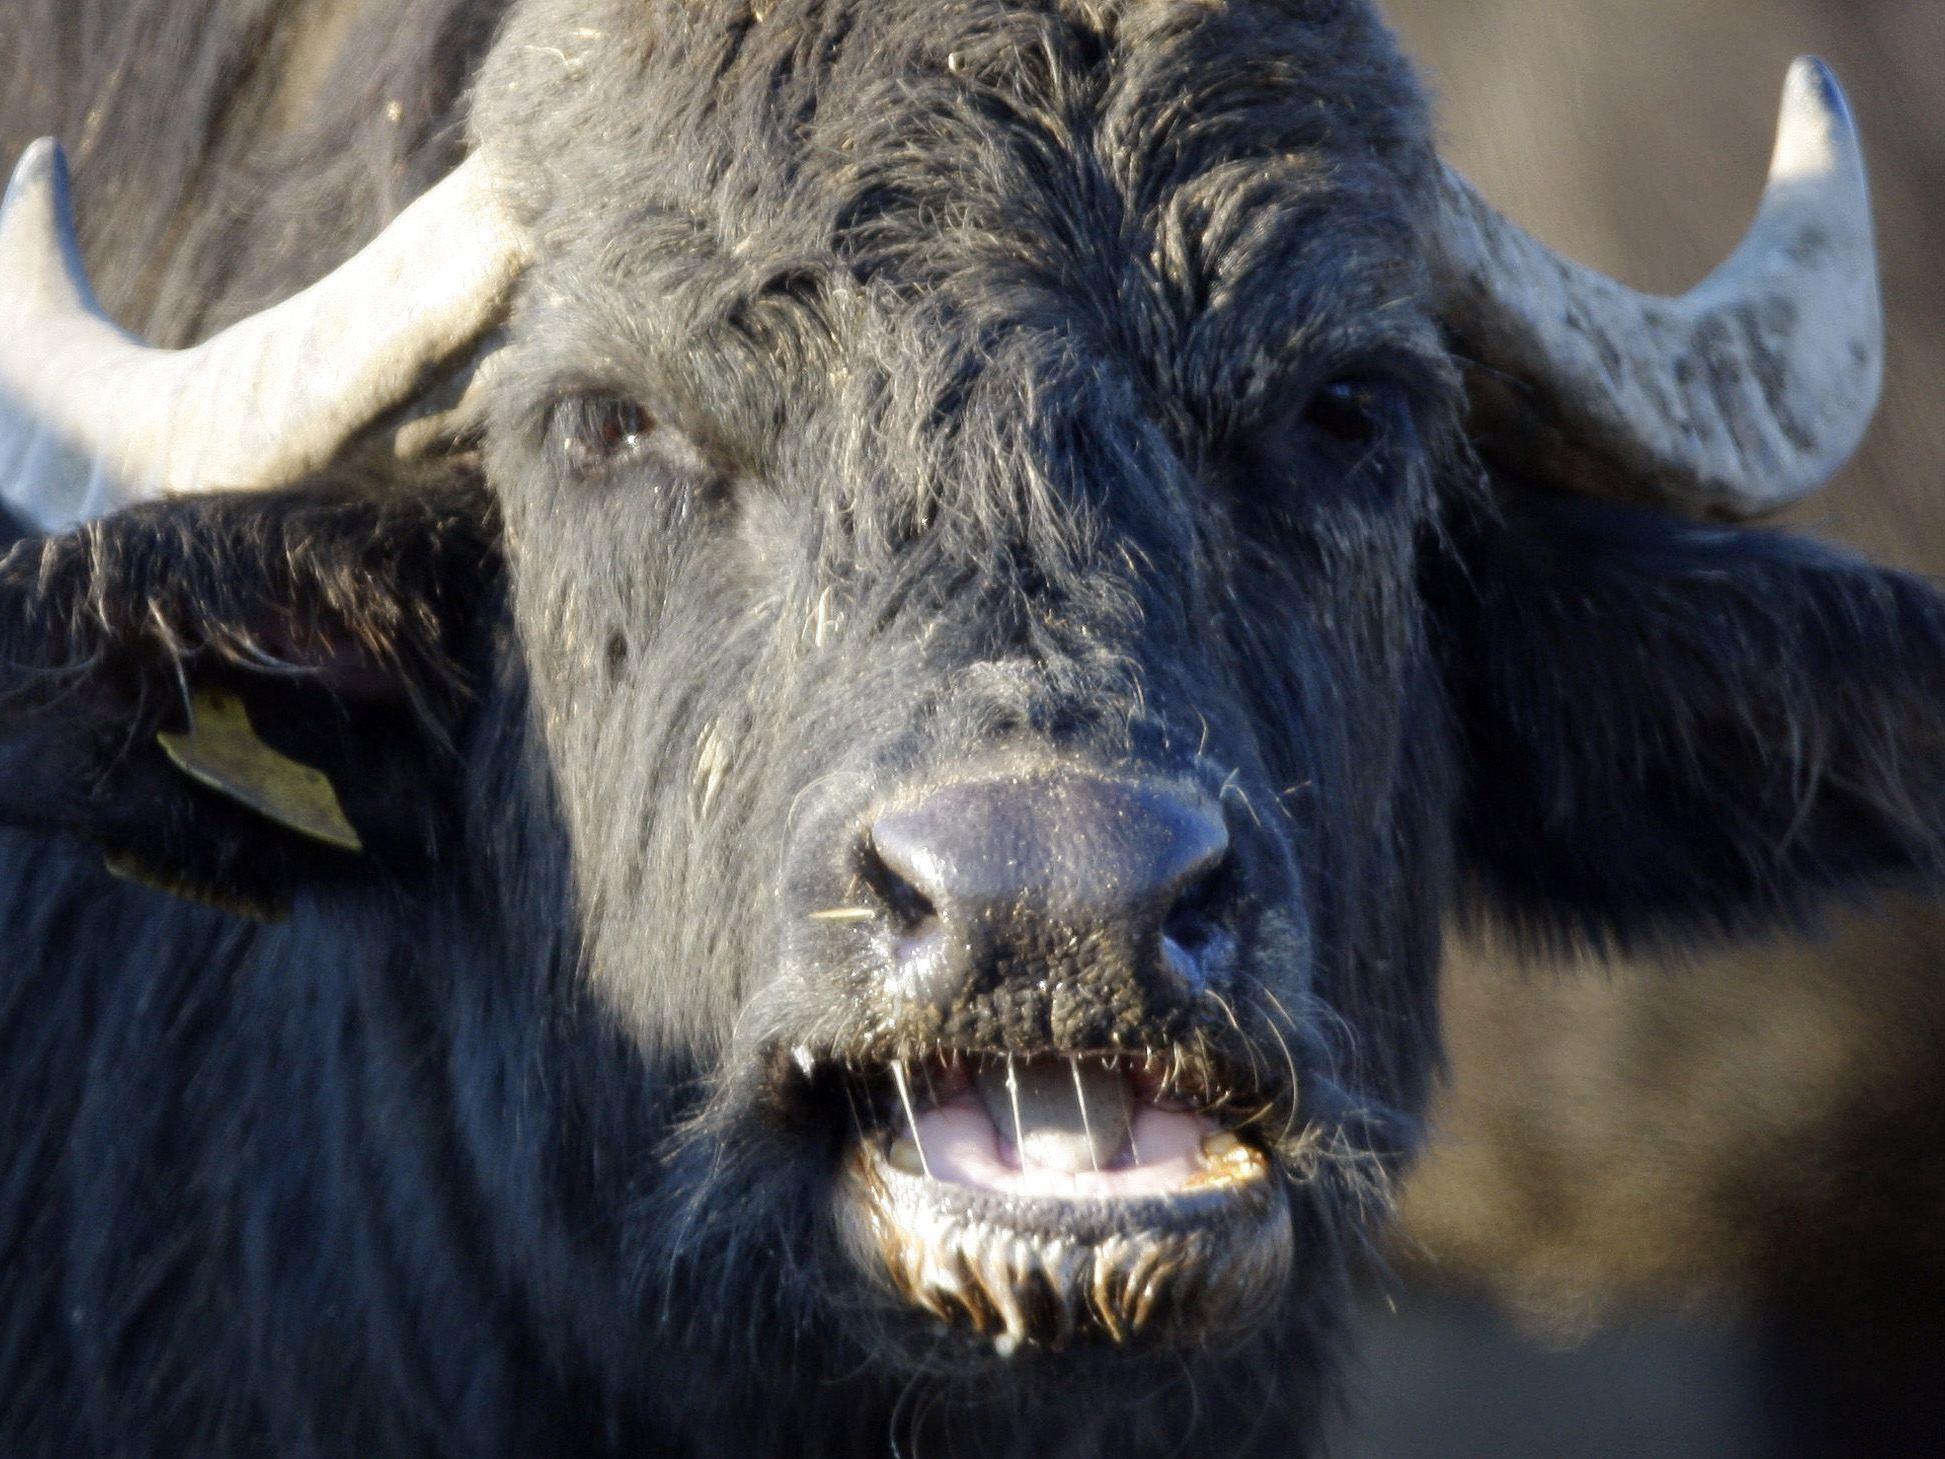 Man dies and two injured after attack by water buffalo in Wales